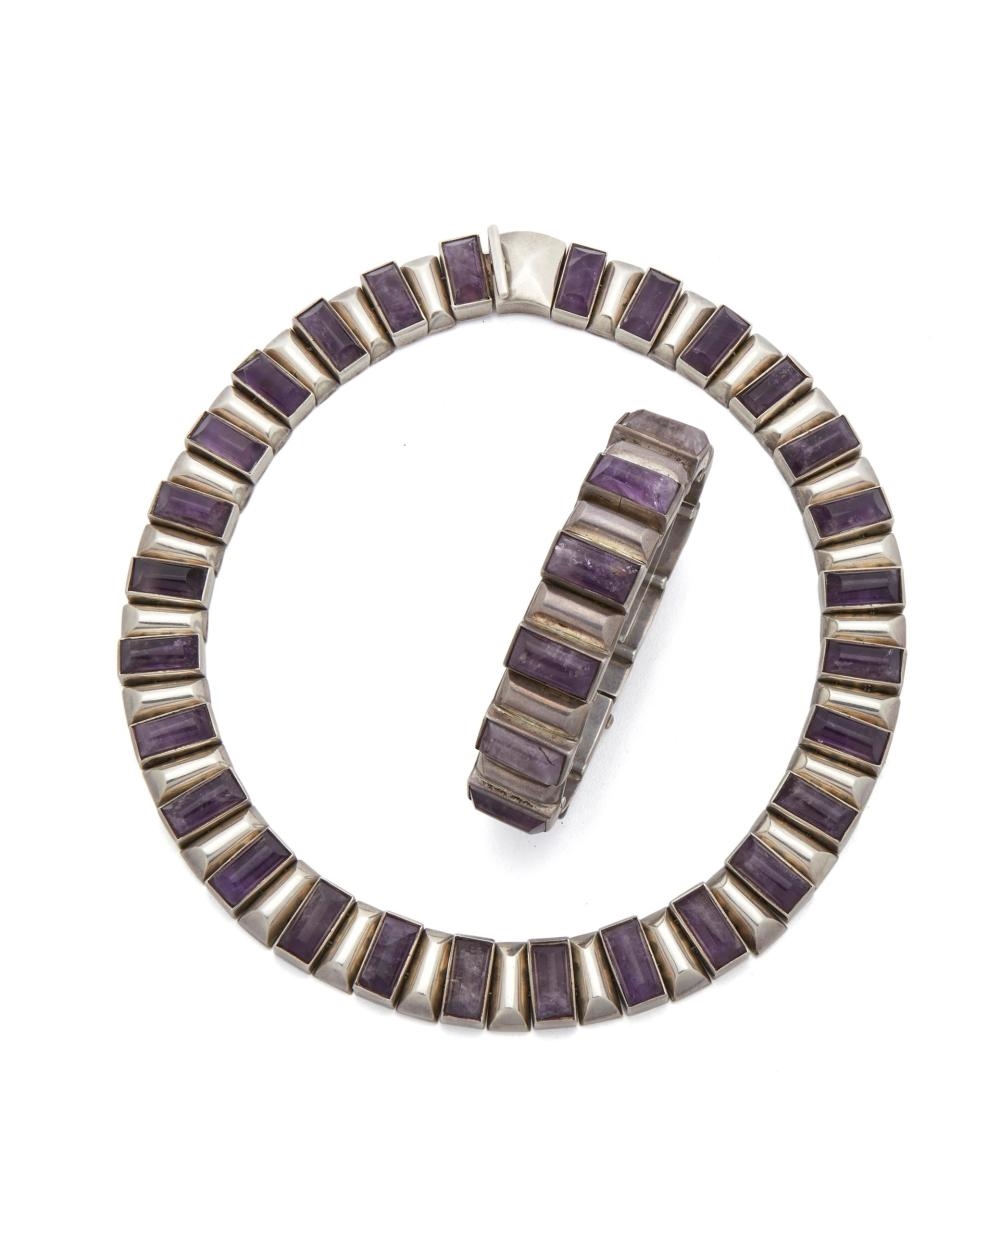 Artwork by Antonio Pineda, A set of sterling silver and amethyst jewelry, Made of silver